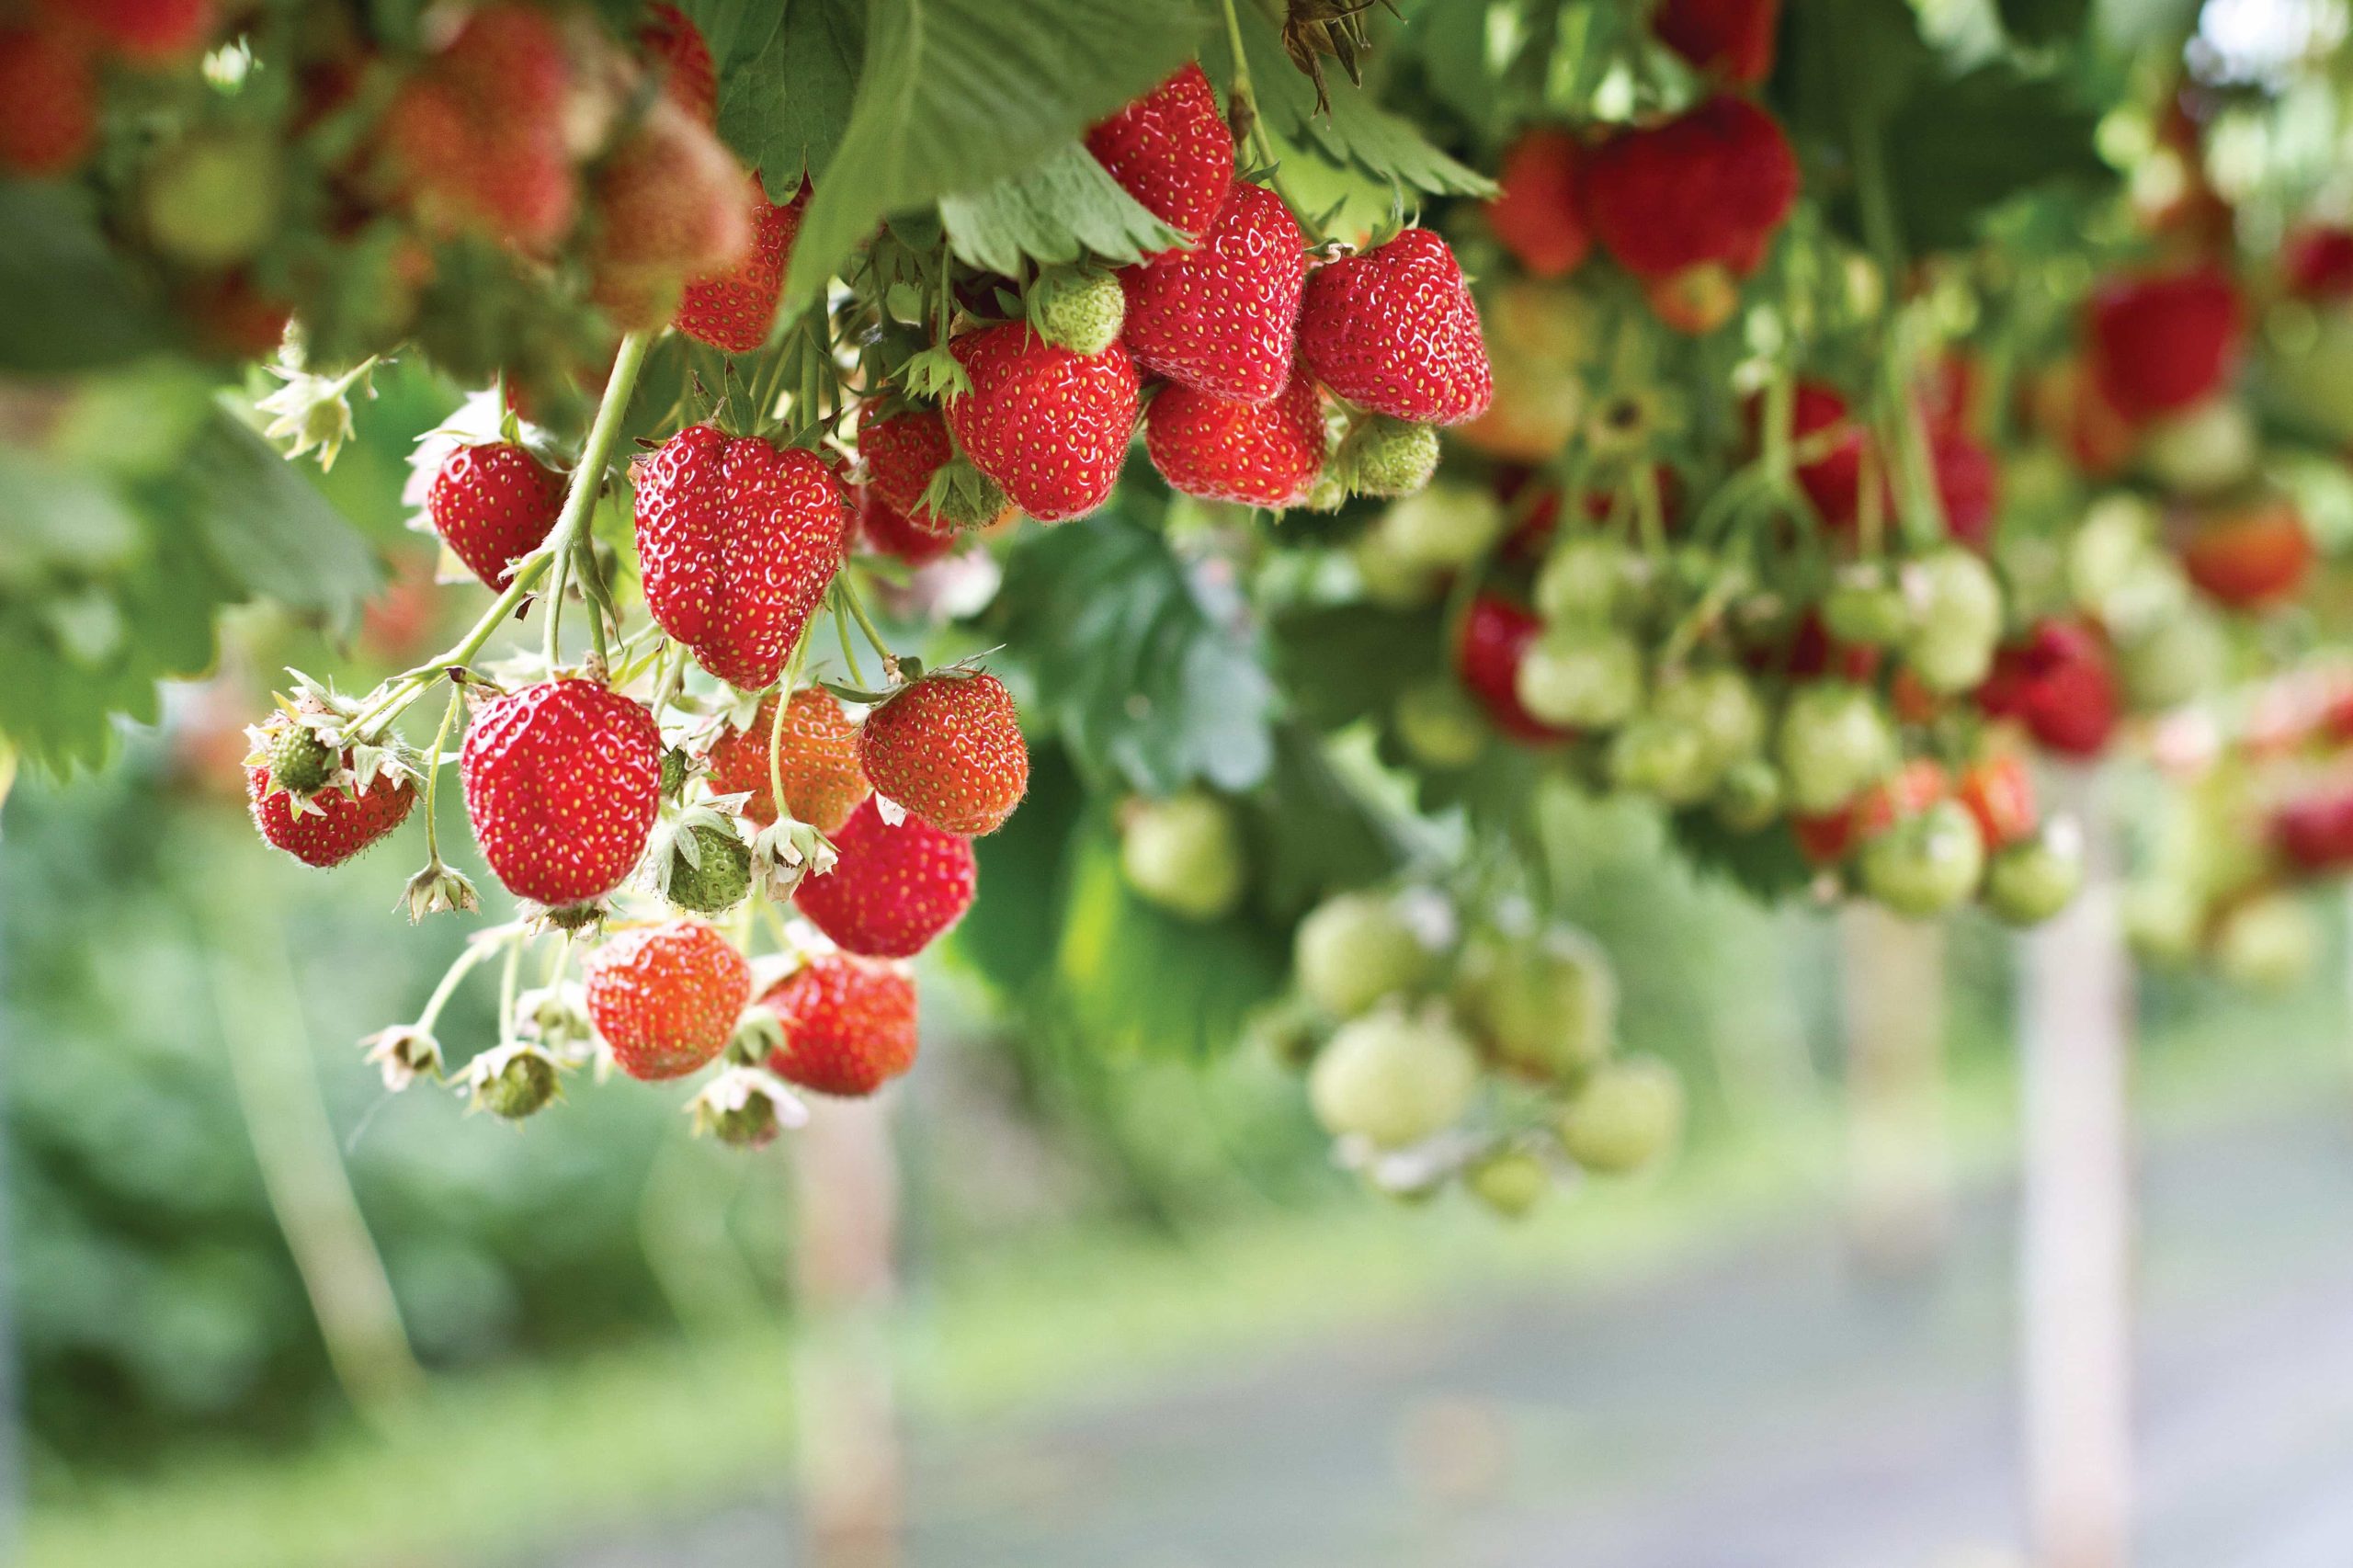 California Strawberries Witnessed Extension of Cultivation Land along with the Increase in Demand